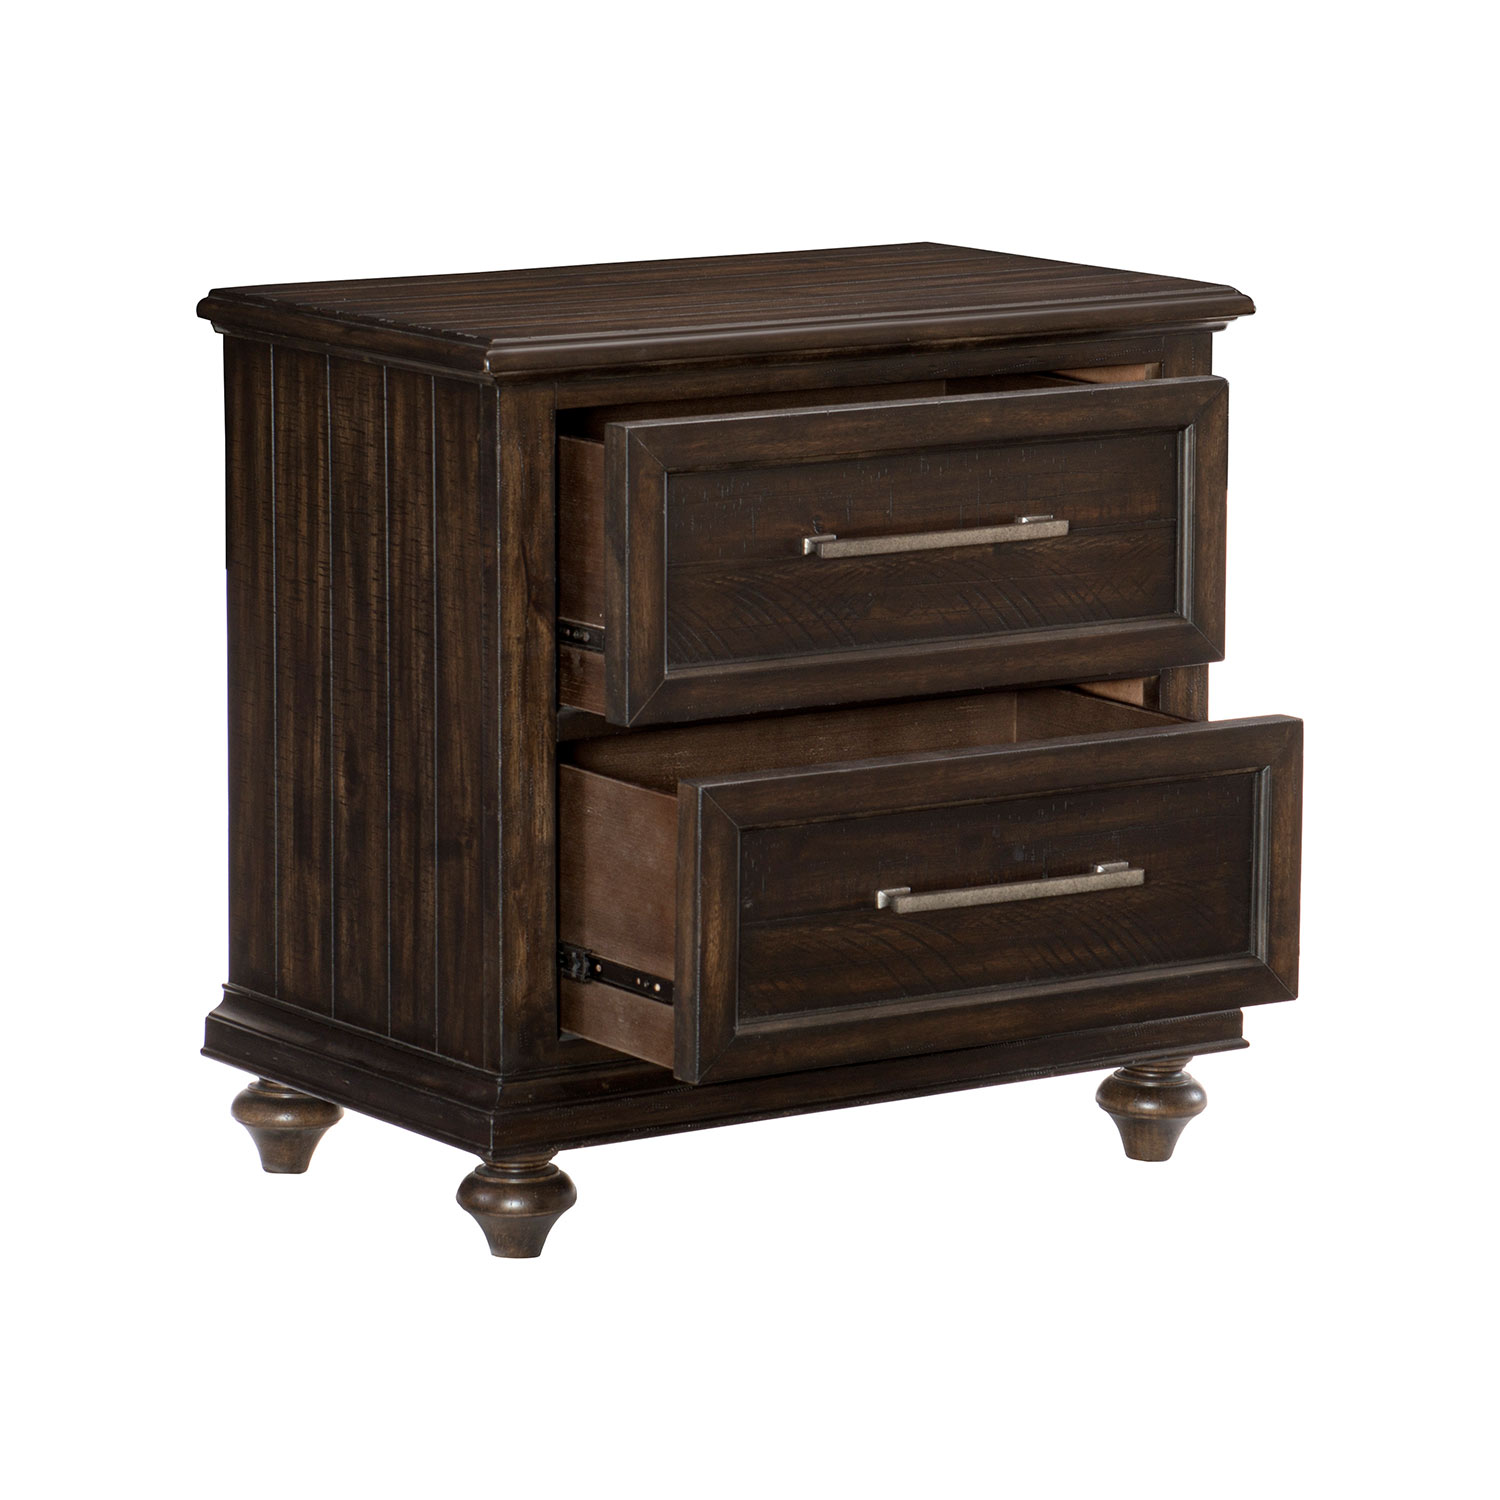 Homelegance Cardano Night Stand - Driftwood Charcoal over Acacia Solids and Veneers